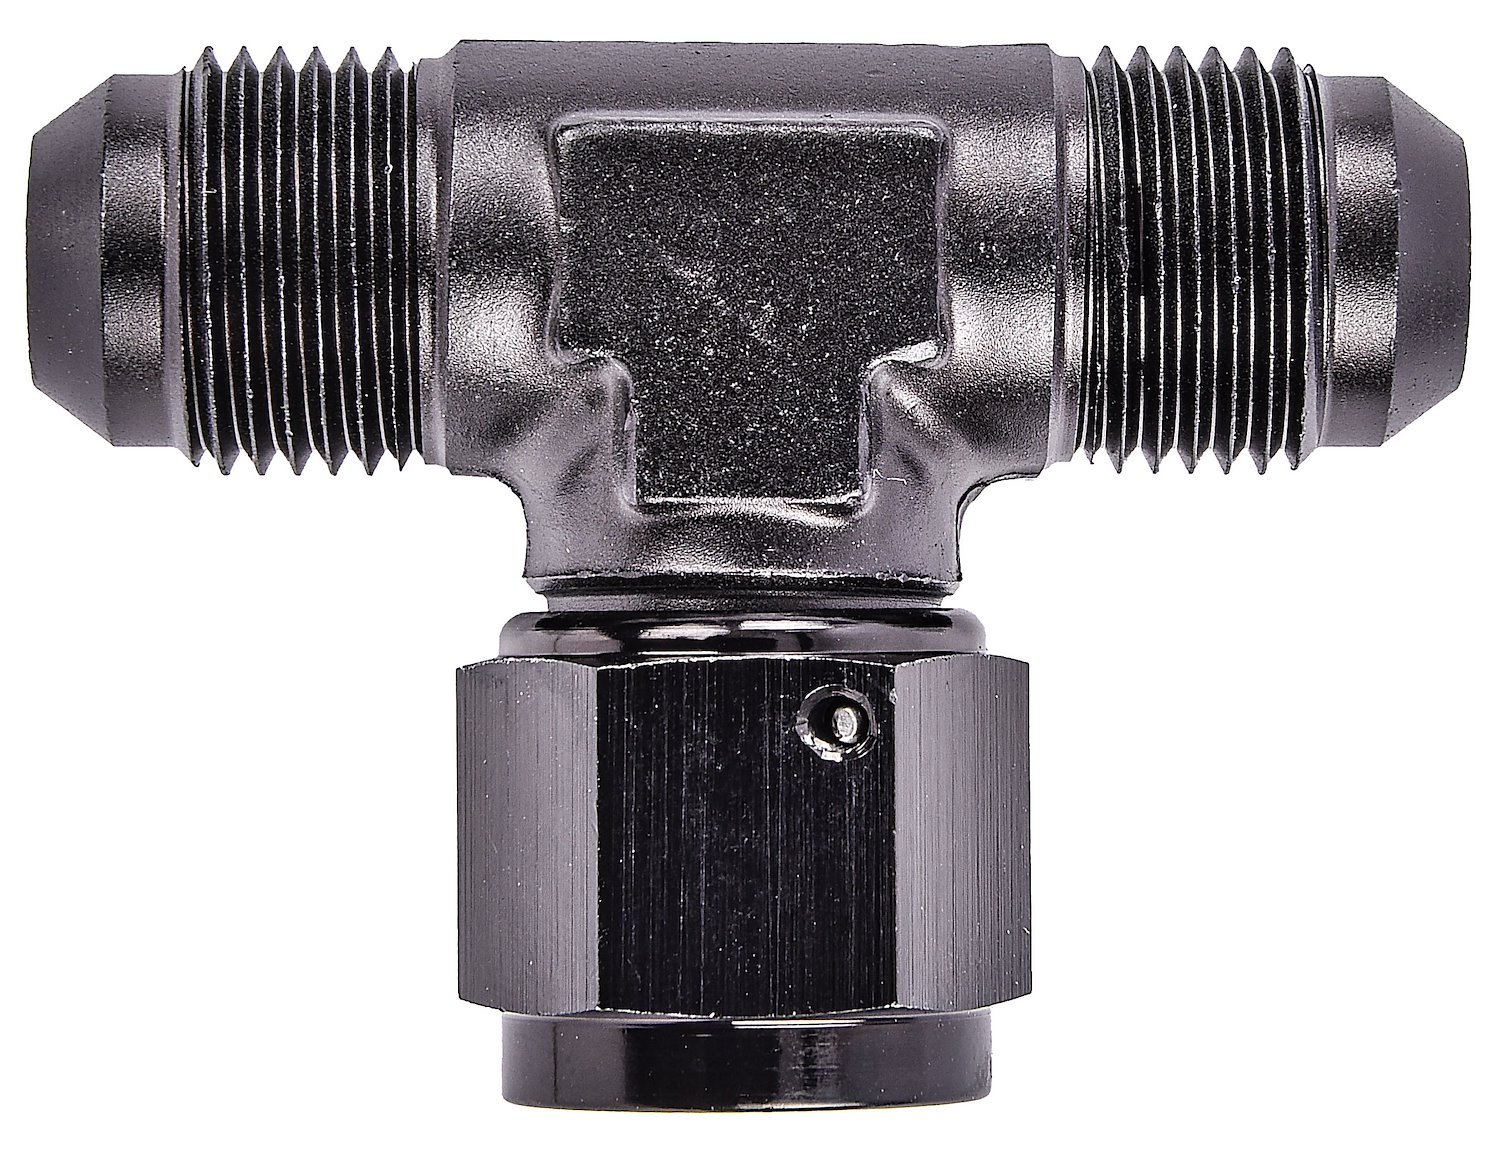 AN to AN Tee Adapter Fitting [-8 AN Male to -8 AN Male, -8 AN Female Swivel Center Port]